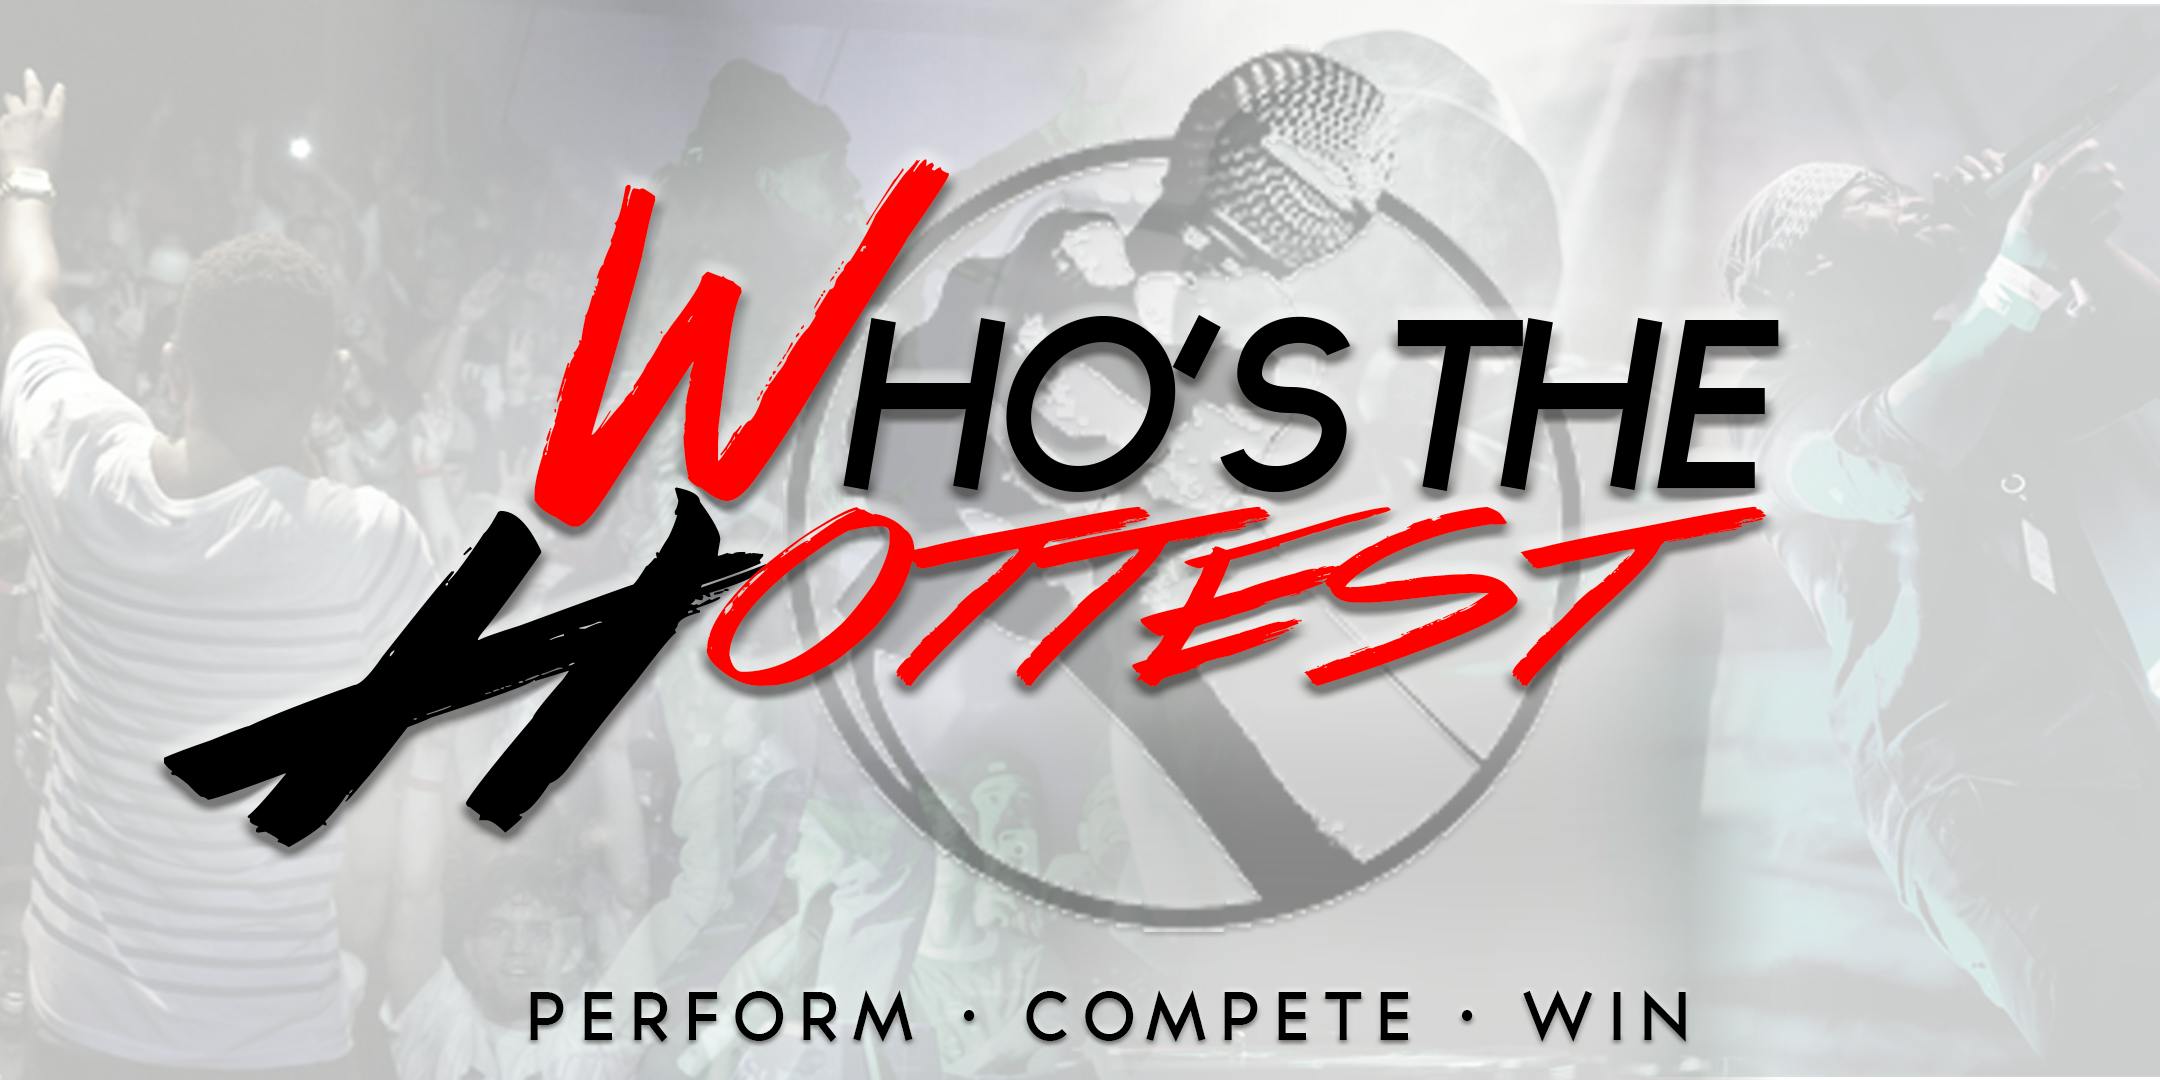 Who’s the Hottest – July 12th at The Blooze (Phoenix)